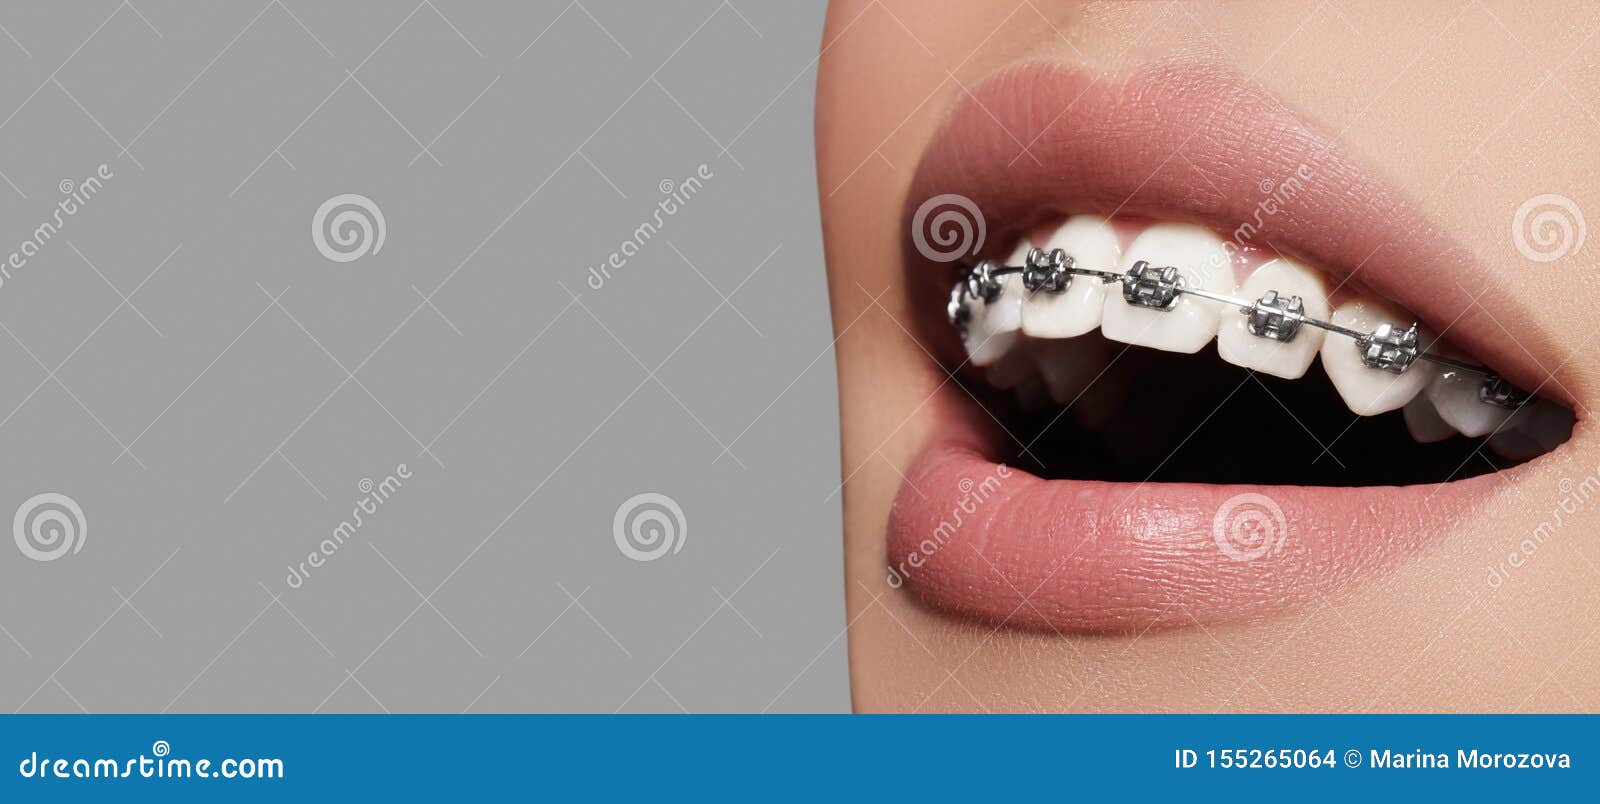 beautiful white teeth with braces. dental care photo. woman smile with ortodontic accessories. orthodontics treatment